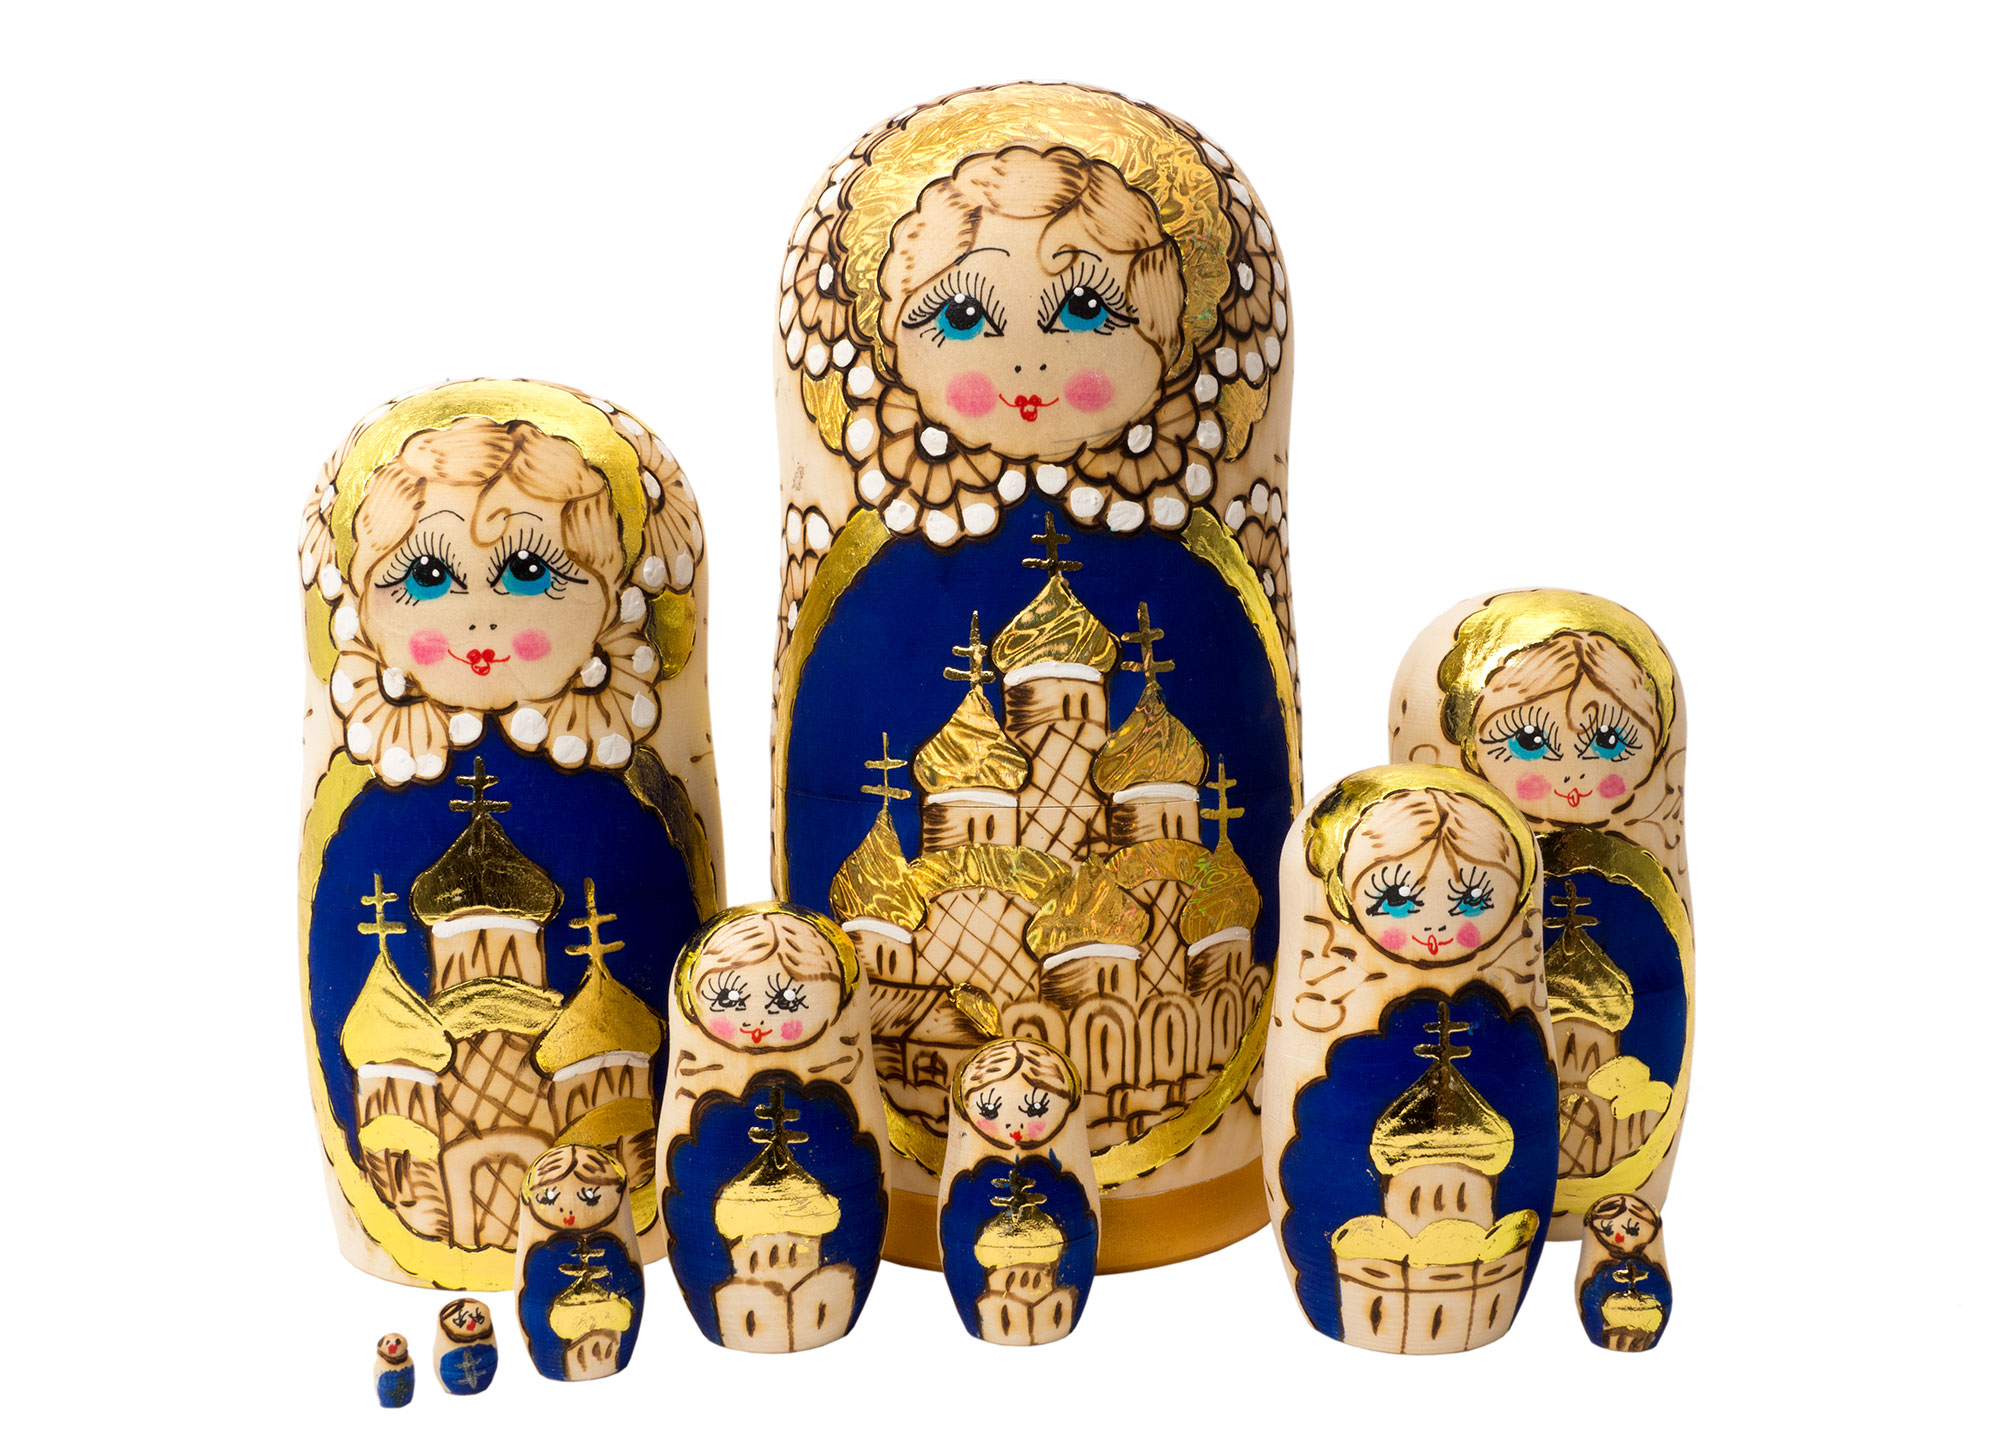 Buy 2nd Quality Woodburned Cathedral Church Nesting Doll 10pc./10"  at GoldenCockerel.com